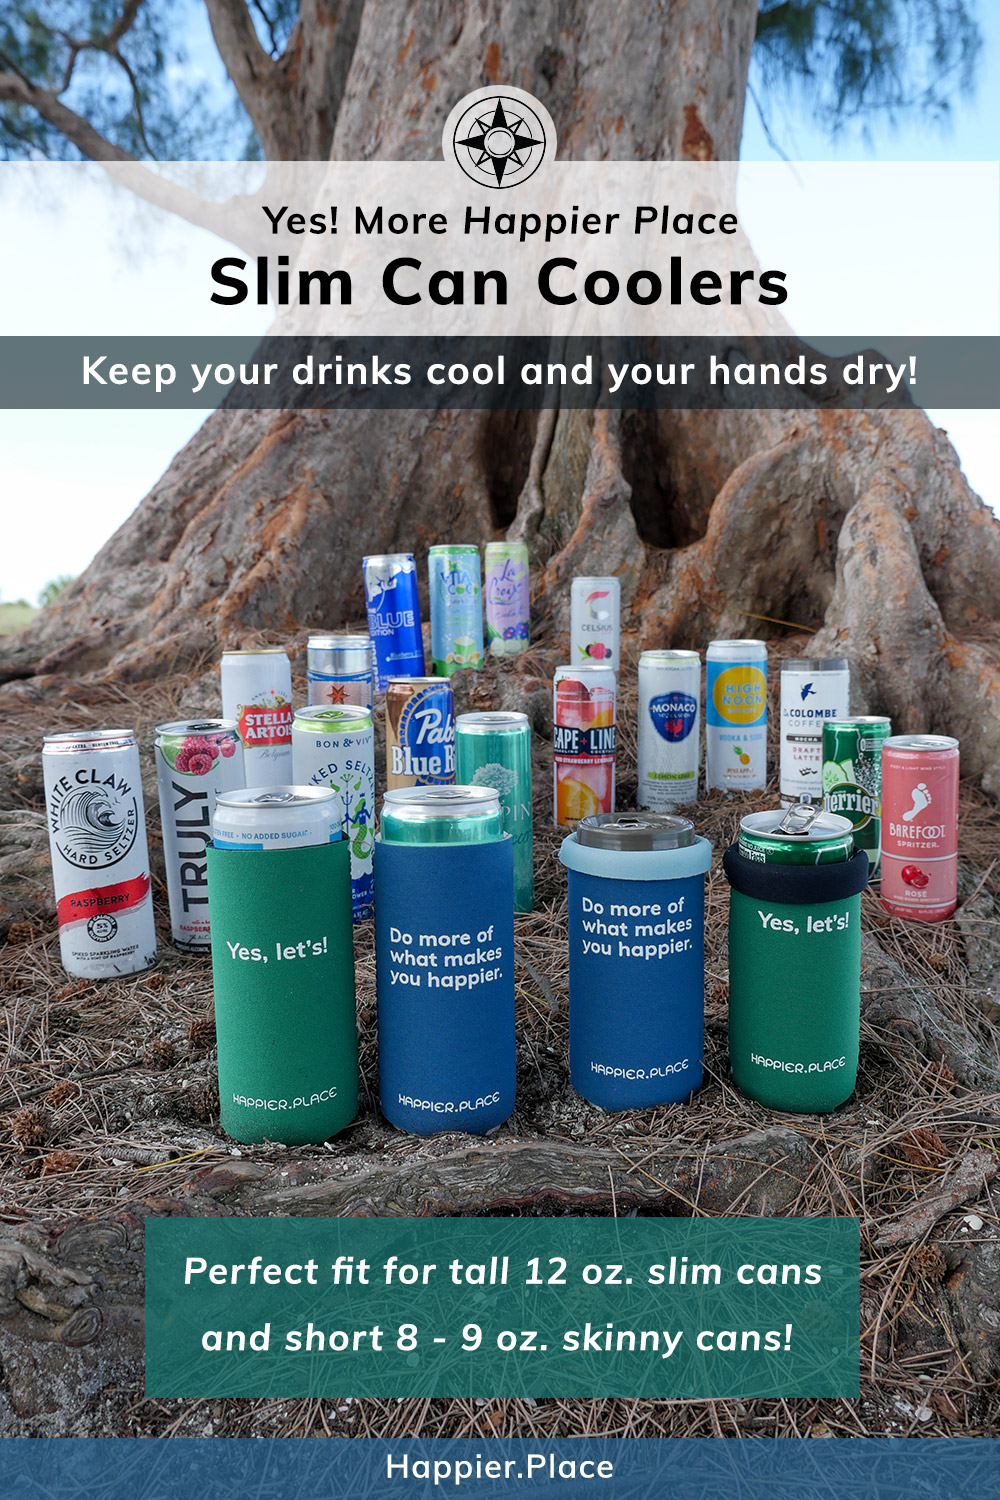 Happier Place Slim can coolers fit 12 oz slim cans for hard seltzers, cocktails, energy drinks, beers and 8 - 9 oz. short cans for wine, coffee